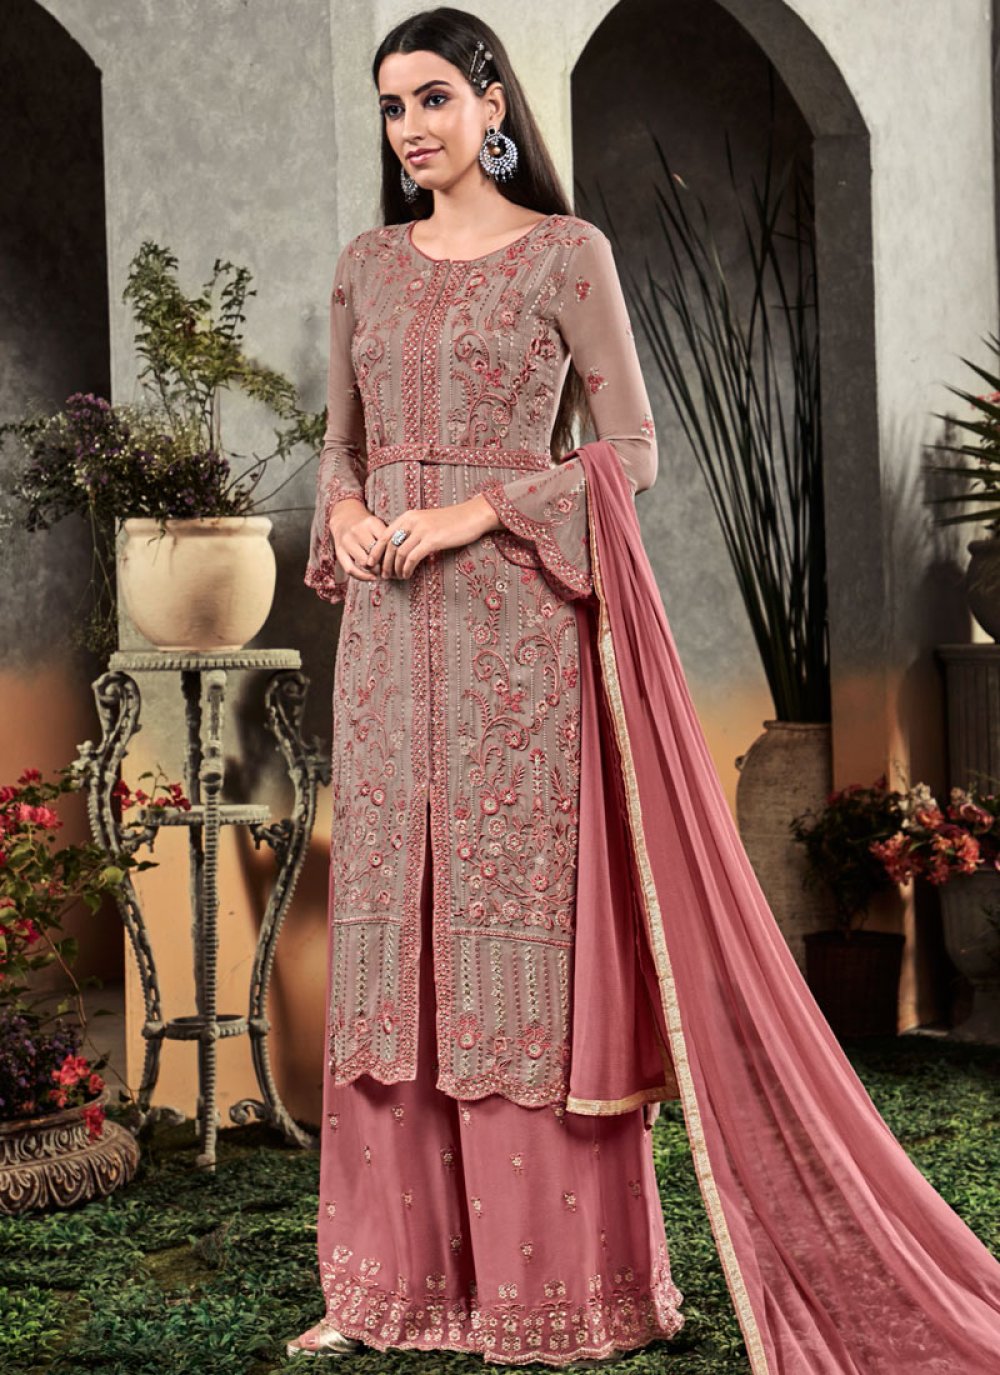 Georgette EMBROIDERY READY TO WEAR NEW DESIGNER PLAAZO SUIT, Straight at Rs  949 in Surat